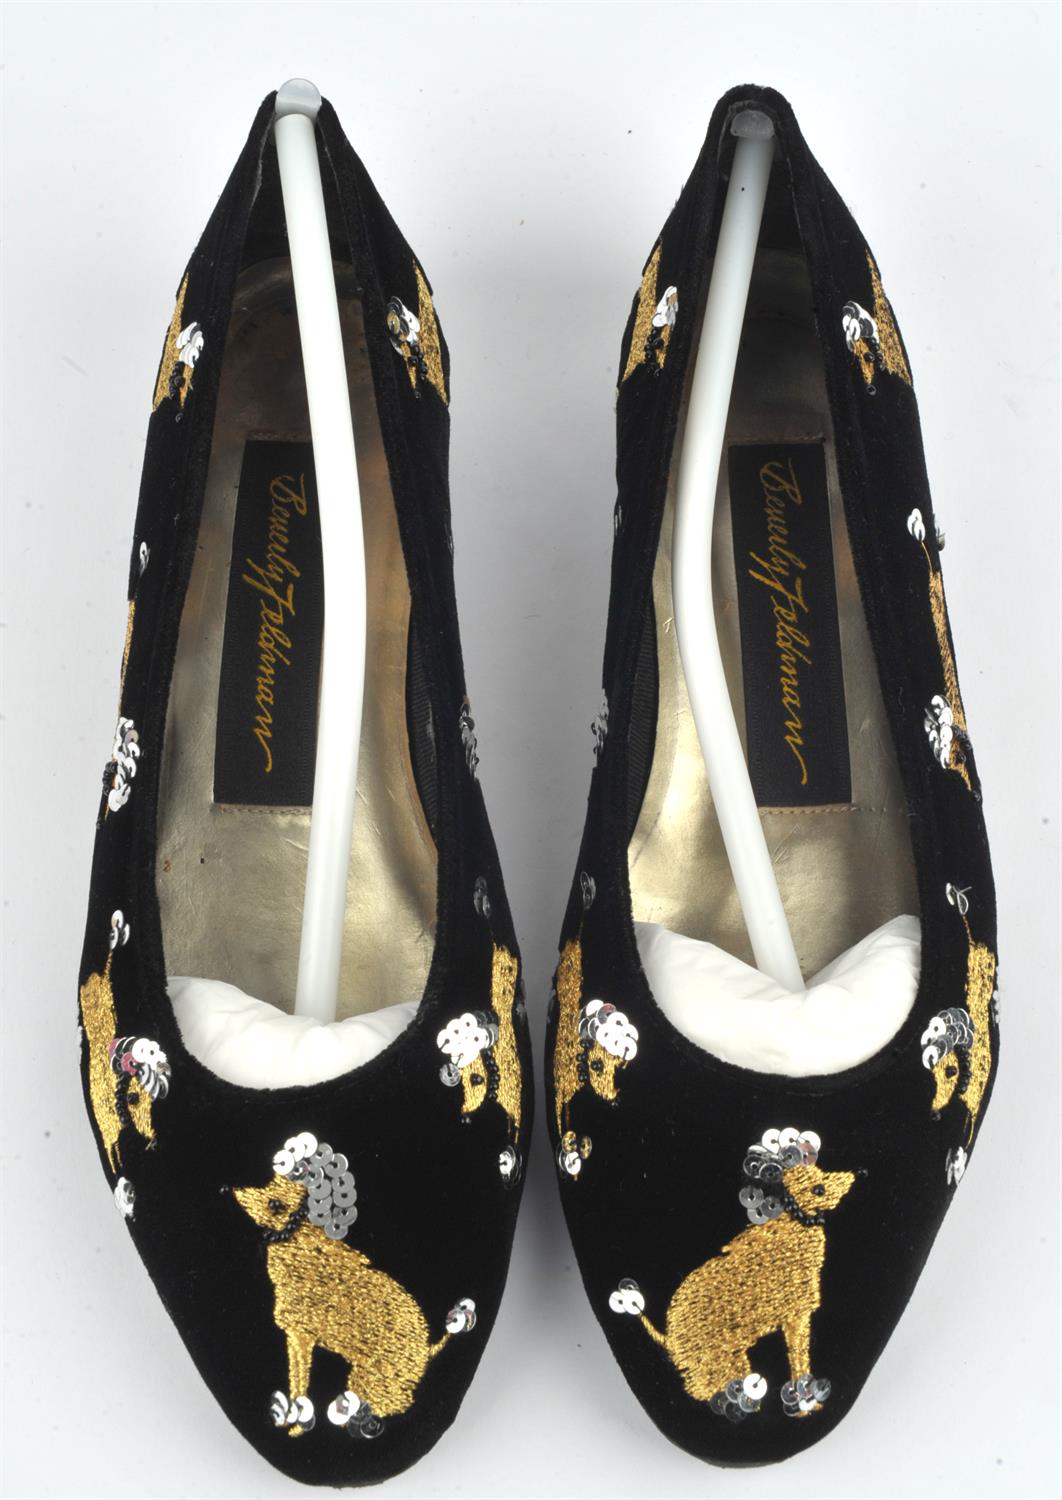 FRANKIE & BABY, BEVERLY FELDMAN (Russell & Bromley) black velvet flat ballet pumps with gold and - Image 2 of 5